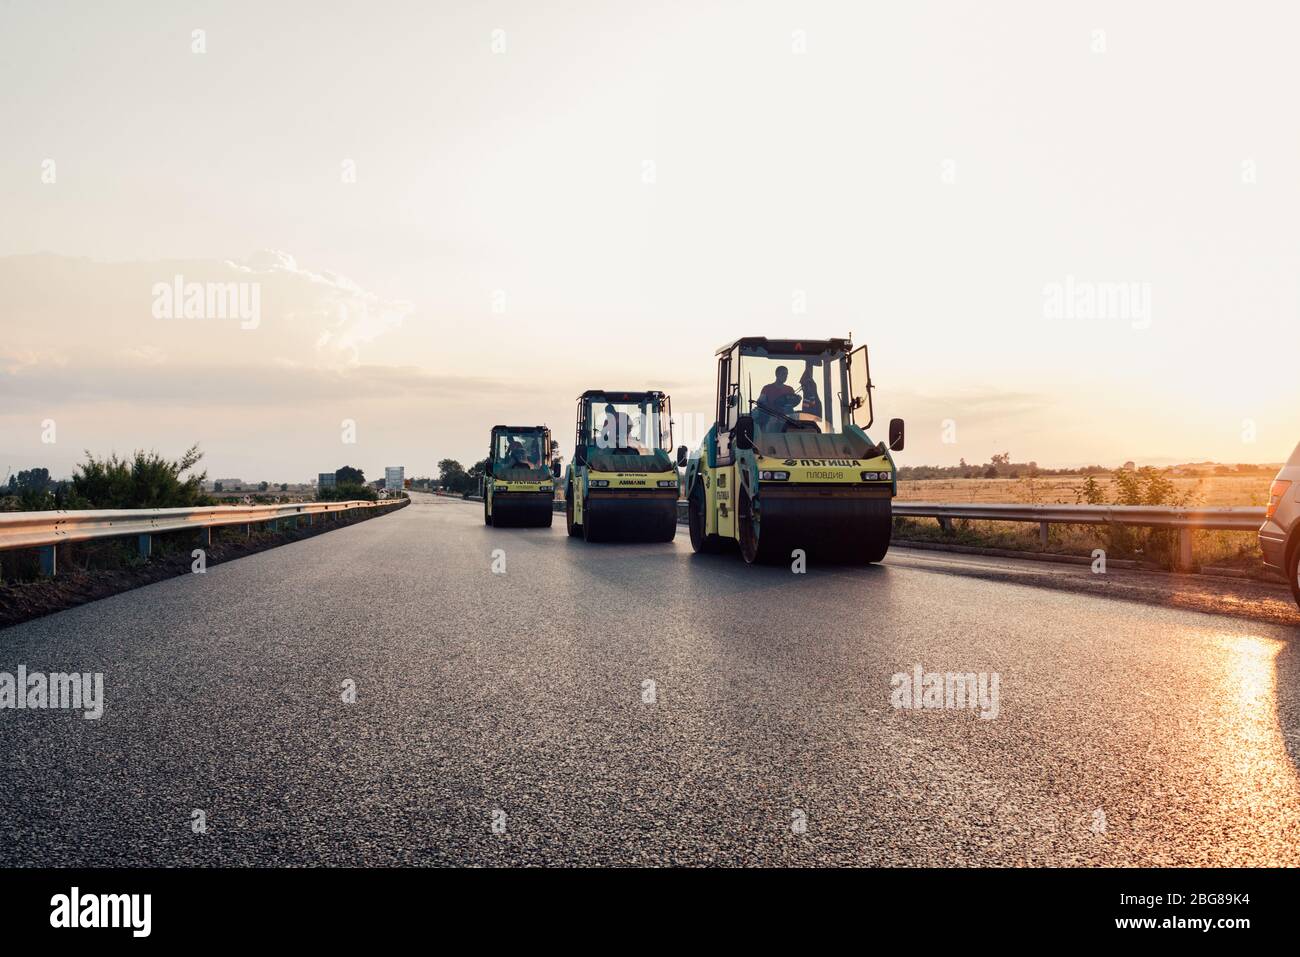 road roller applying a new asphalt surface. asphalt paving construction site on a highway  road construction and asphalting with machine Stock Photo